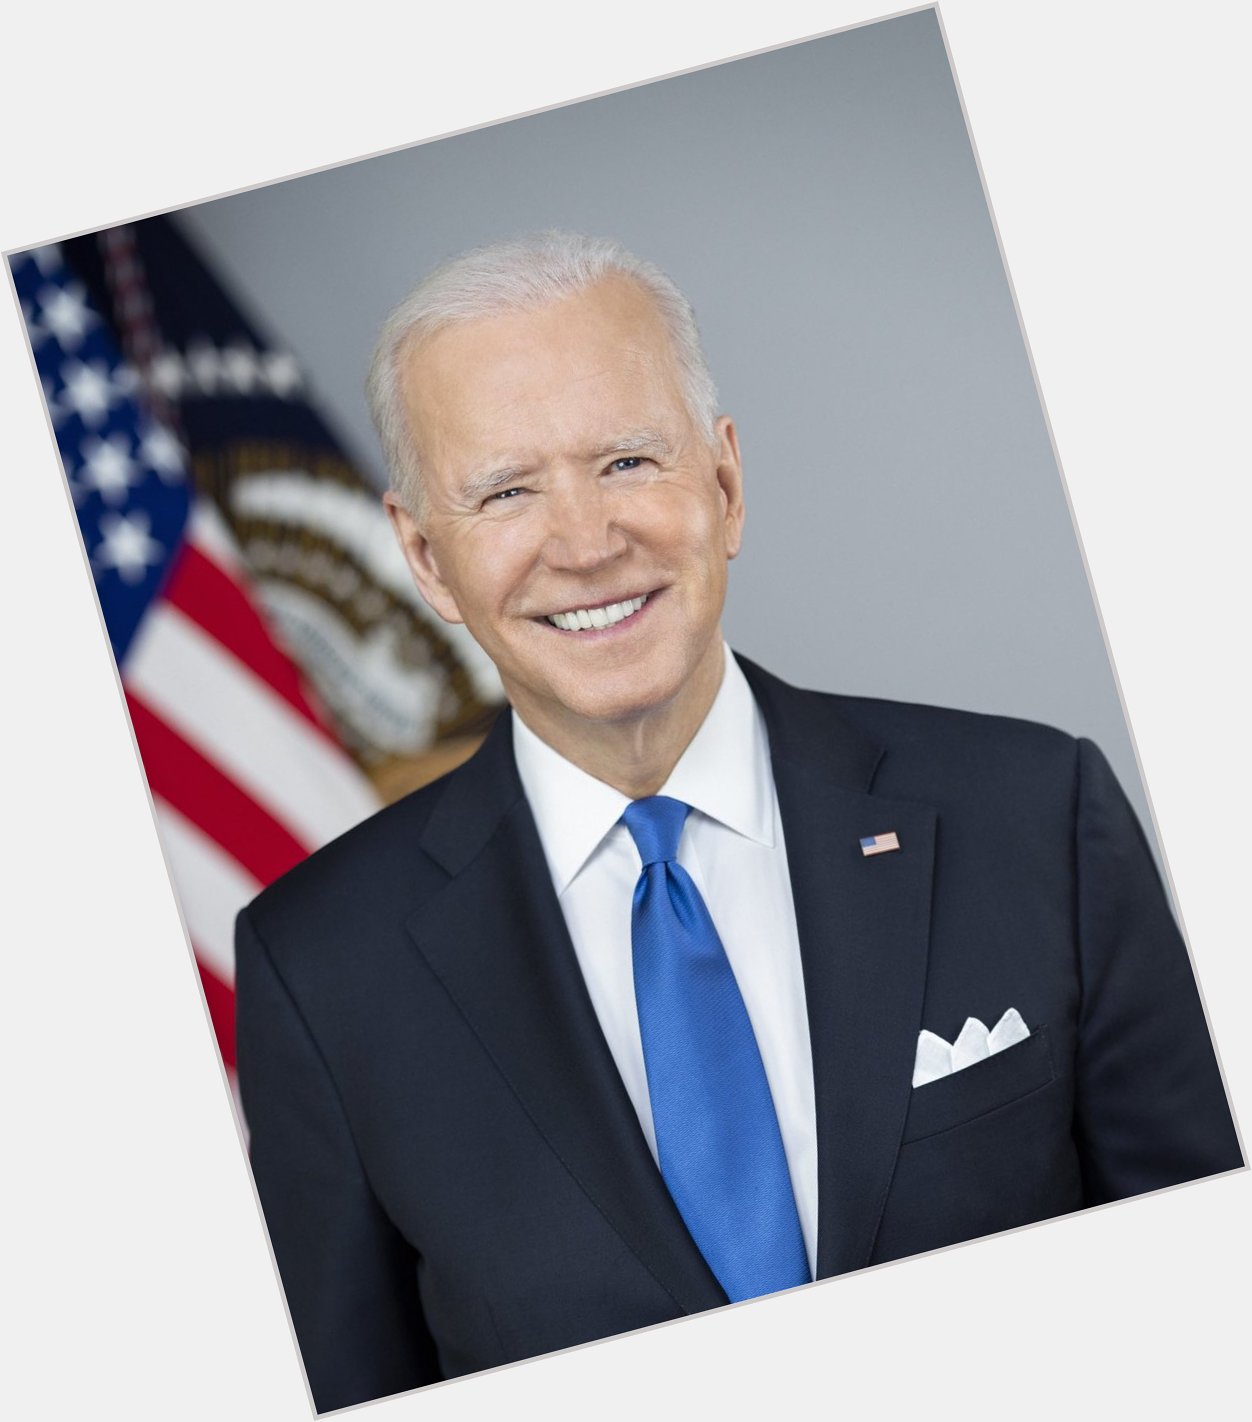 Happy birthday to president Joe Biden he was born on November 20, 1942 and today he is 79 years old 